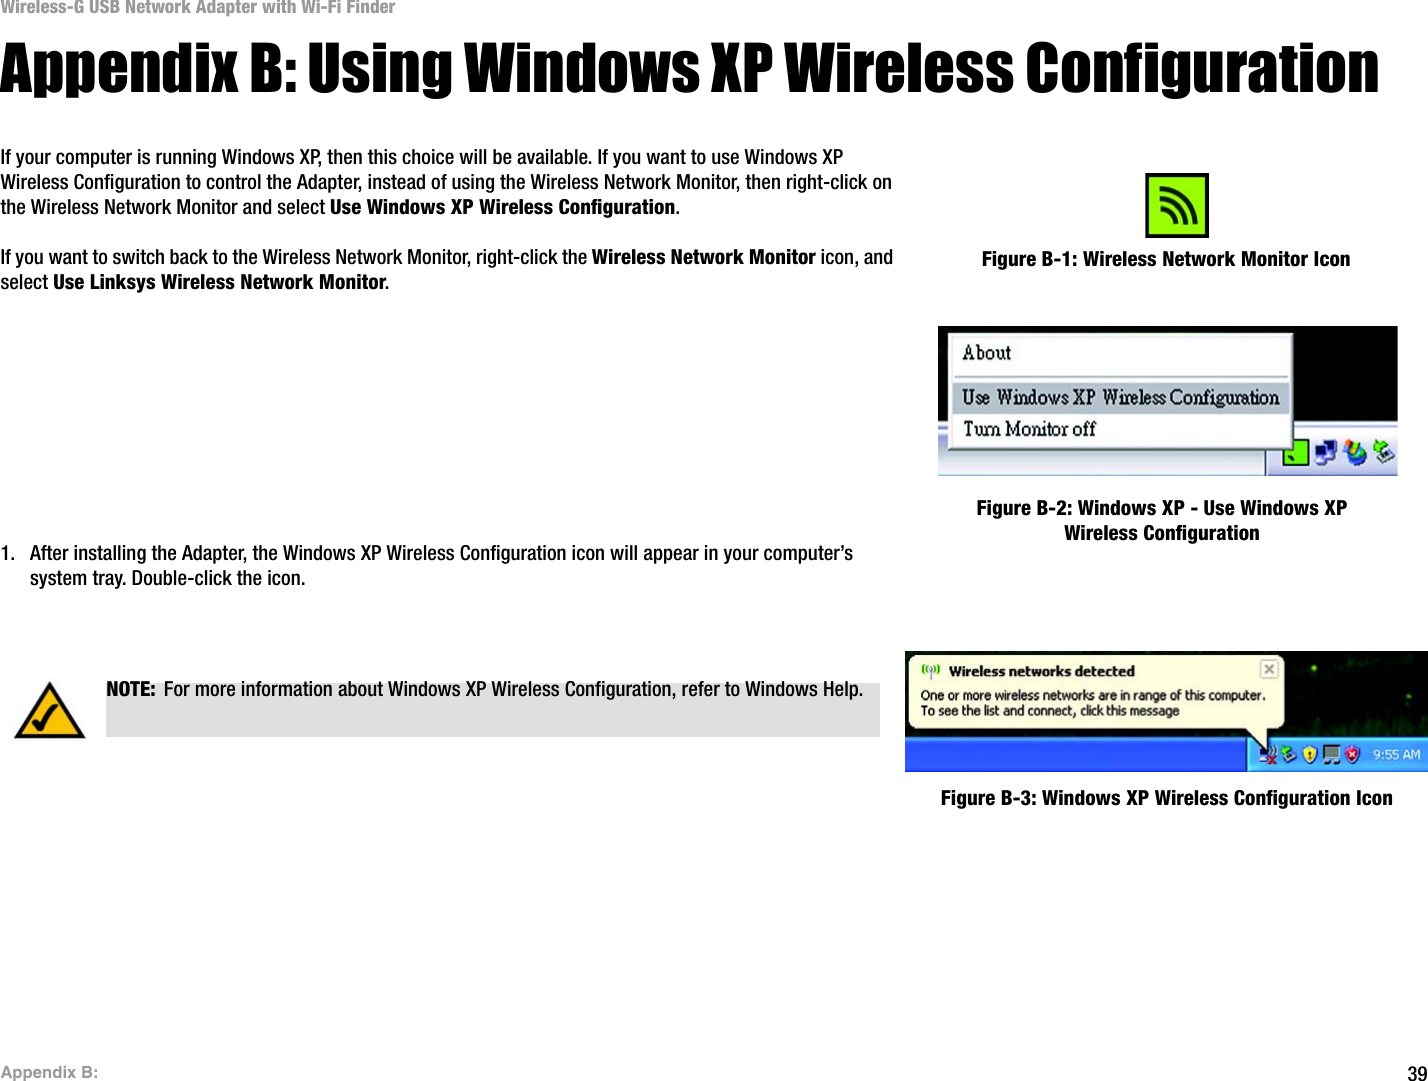 39Appendix B: Wireless-G USB Network Adapter with Wi-Fi FinderAppendix B: Using Windows XP Wireless ConfigurationIf your computer is running Windows XP, then this choice will be available. If you want to use Windows XP Wireless Configuration to control the Adapter, instead of using the Wireless Network Monitor, then right-click on the Wireless Network Monitor and select Use Windows XP Wireless Configuration. If you want to switch back to the Wireless Network Monitor, right-click the Wireless Network Monitor icon, and select Use Linksys Wireless Network Monitor.1. After installing the Adapter, the Windows XP Wireless Configuration icon will appear in your computer’s system tray. Double-click the icon. Figure B-1: Wireless Network Monitor IconFigure B-2: Windows XP - Use Windows XP Wireless ConfigurationNOTE: For more information about Windows XP Wireless Configuration, refer to Windows Help.Figure B-3: Windows XP Wireless Configuration Icon